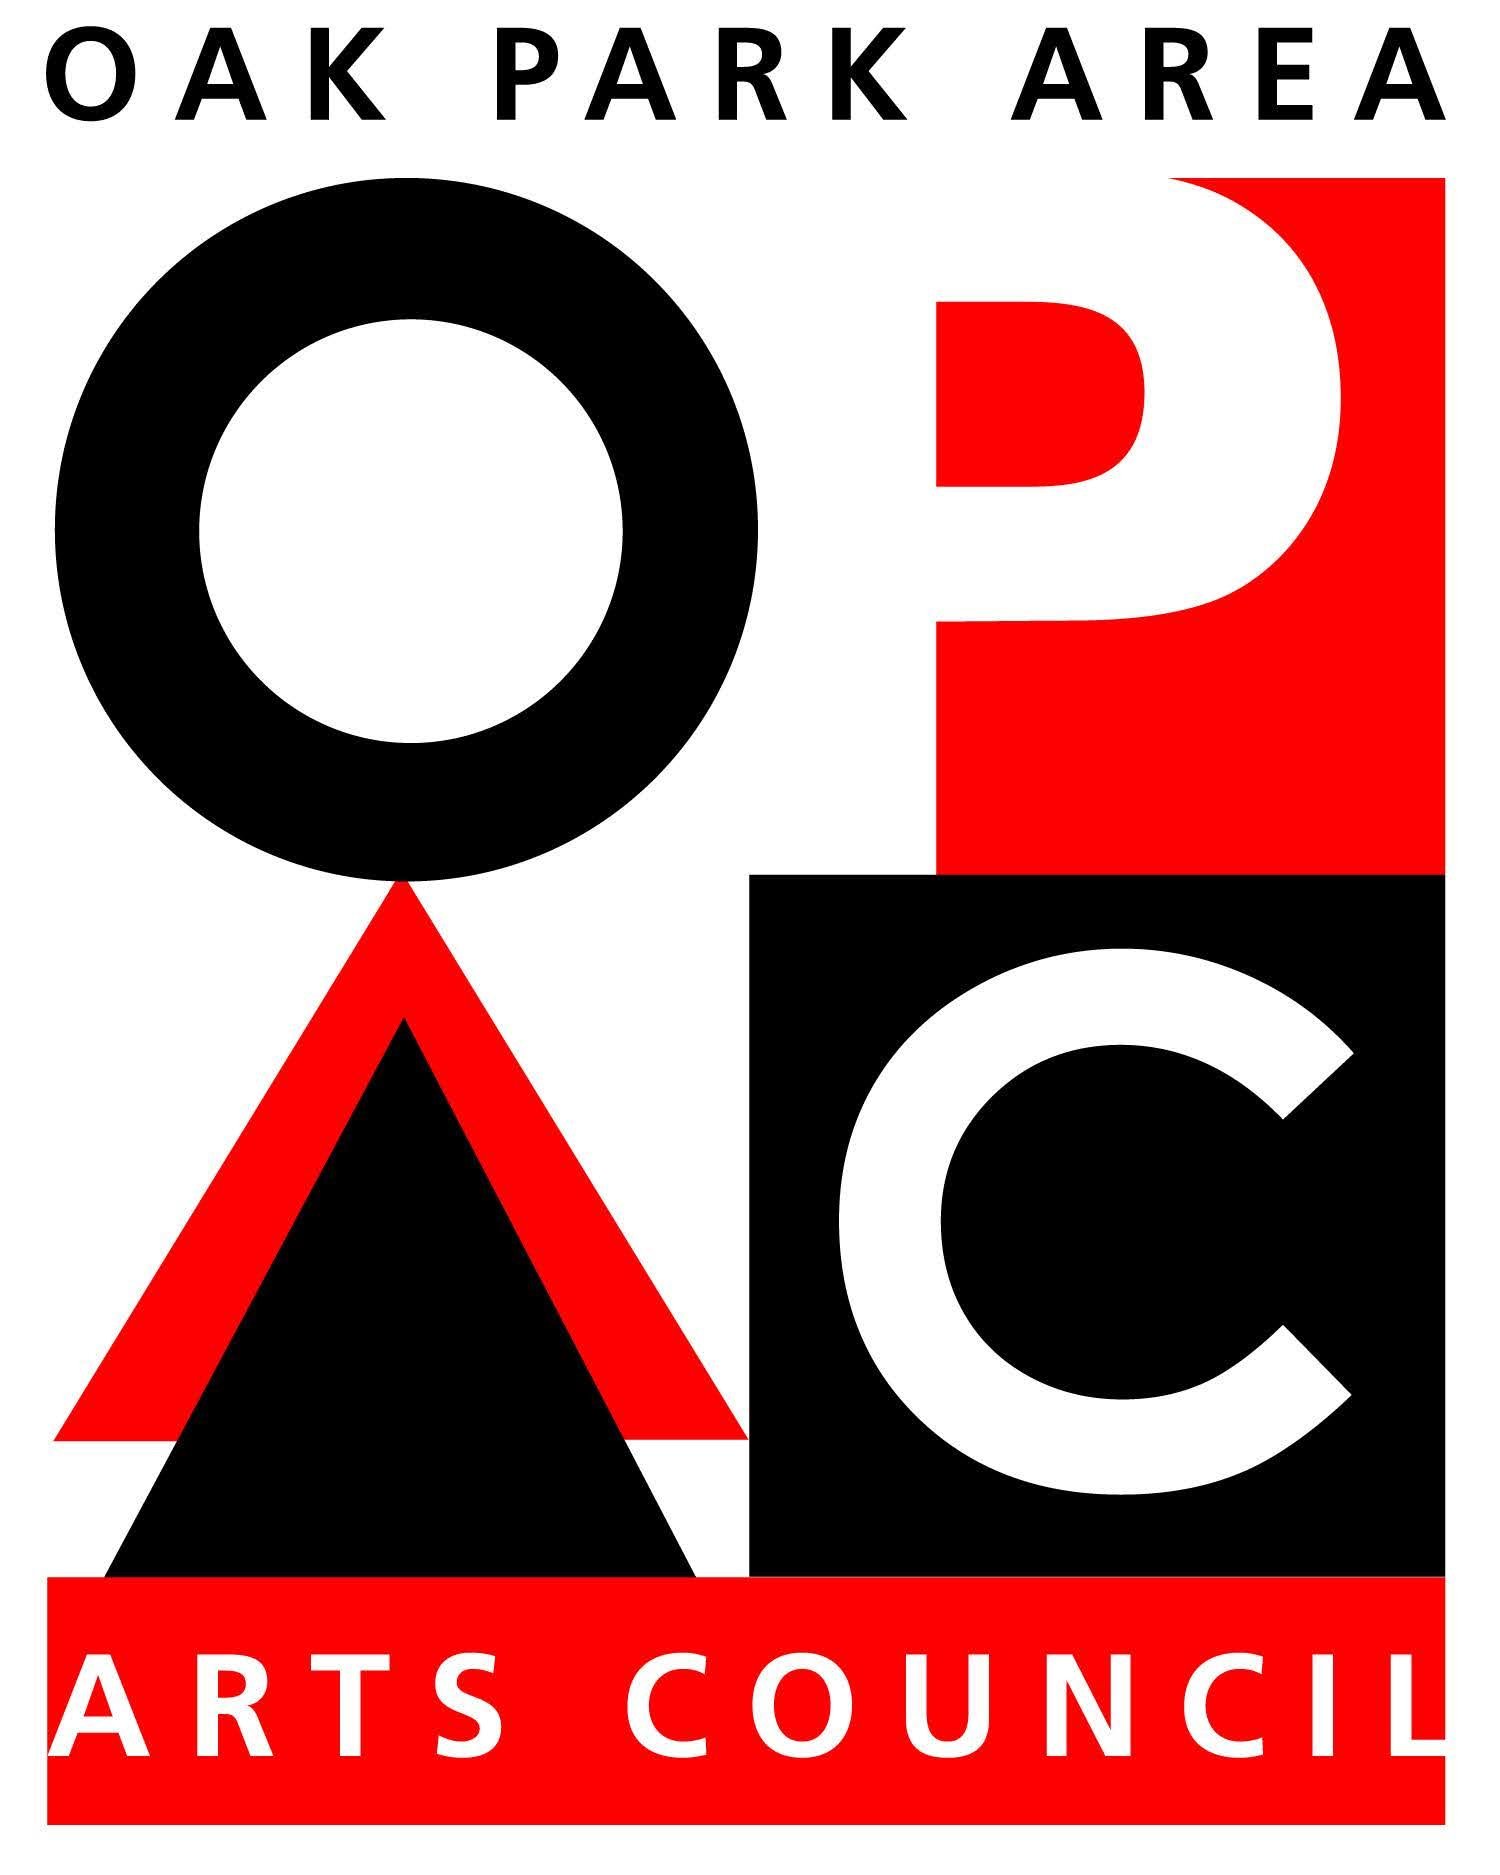   Ernest Hemingway Foundation of Oak Park is partially funded by the Oak Park Area Arts Council, in partnership with the Village of Oak Park, the American Rescue Plan Act, the Illinois Arts Council Agency and the National Endowment for the Arts.  